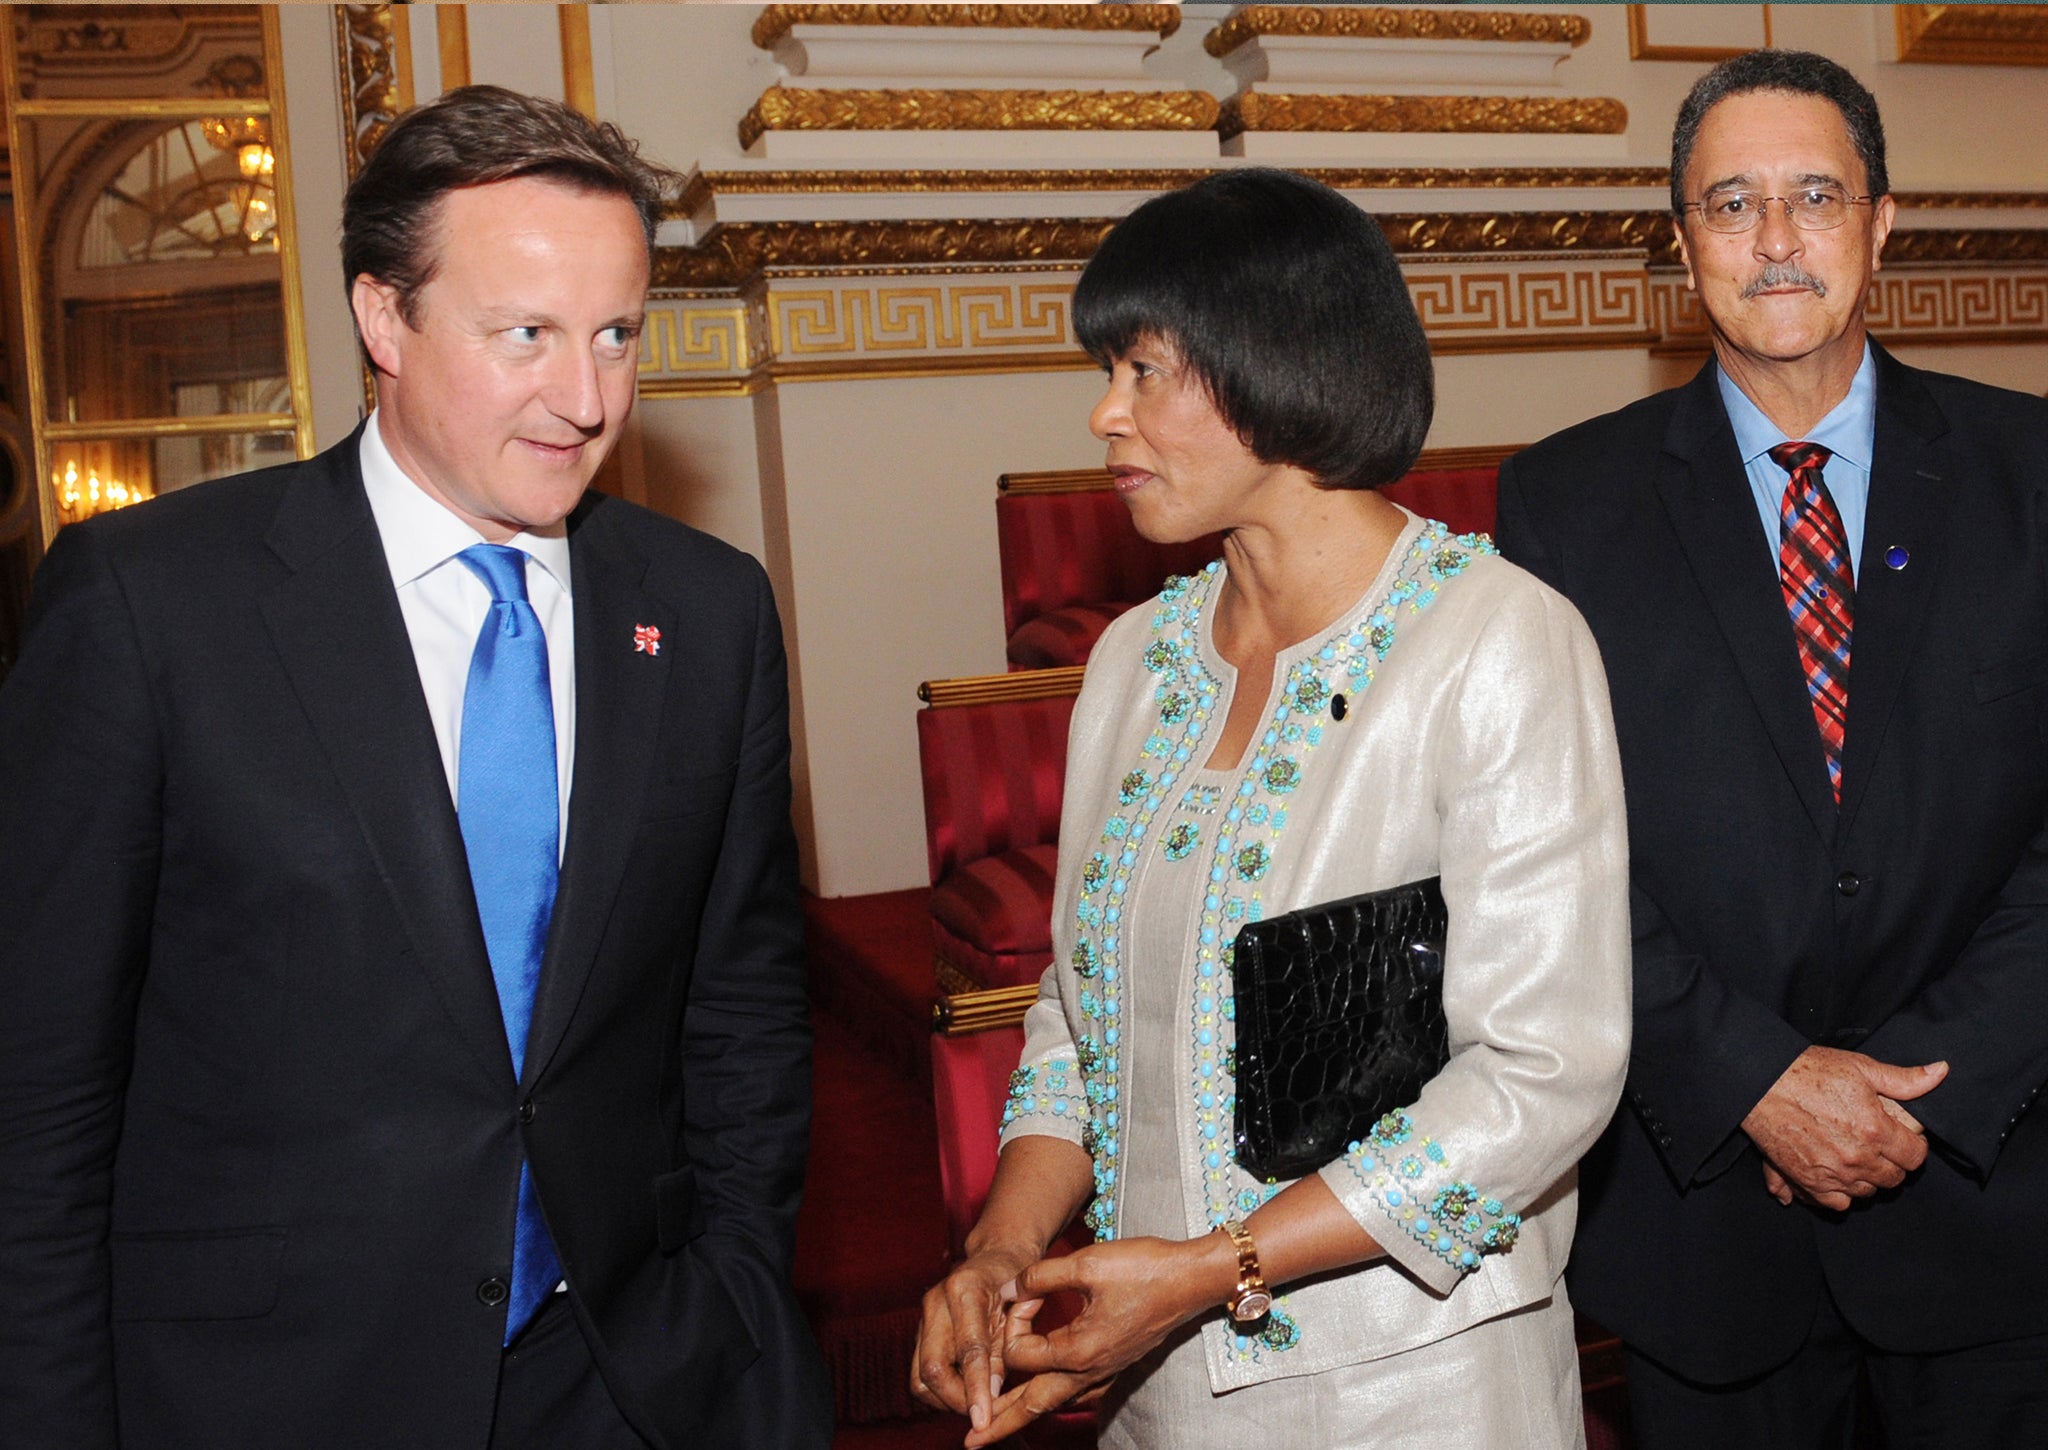 David Cameron meets Prime Minister of Jamaica Portia Simpson Miller and St Lucia's Prime Minister Kenny Anthony during a reception at Buckingham Palace